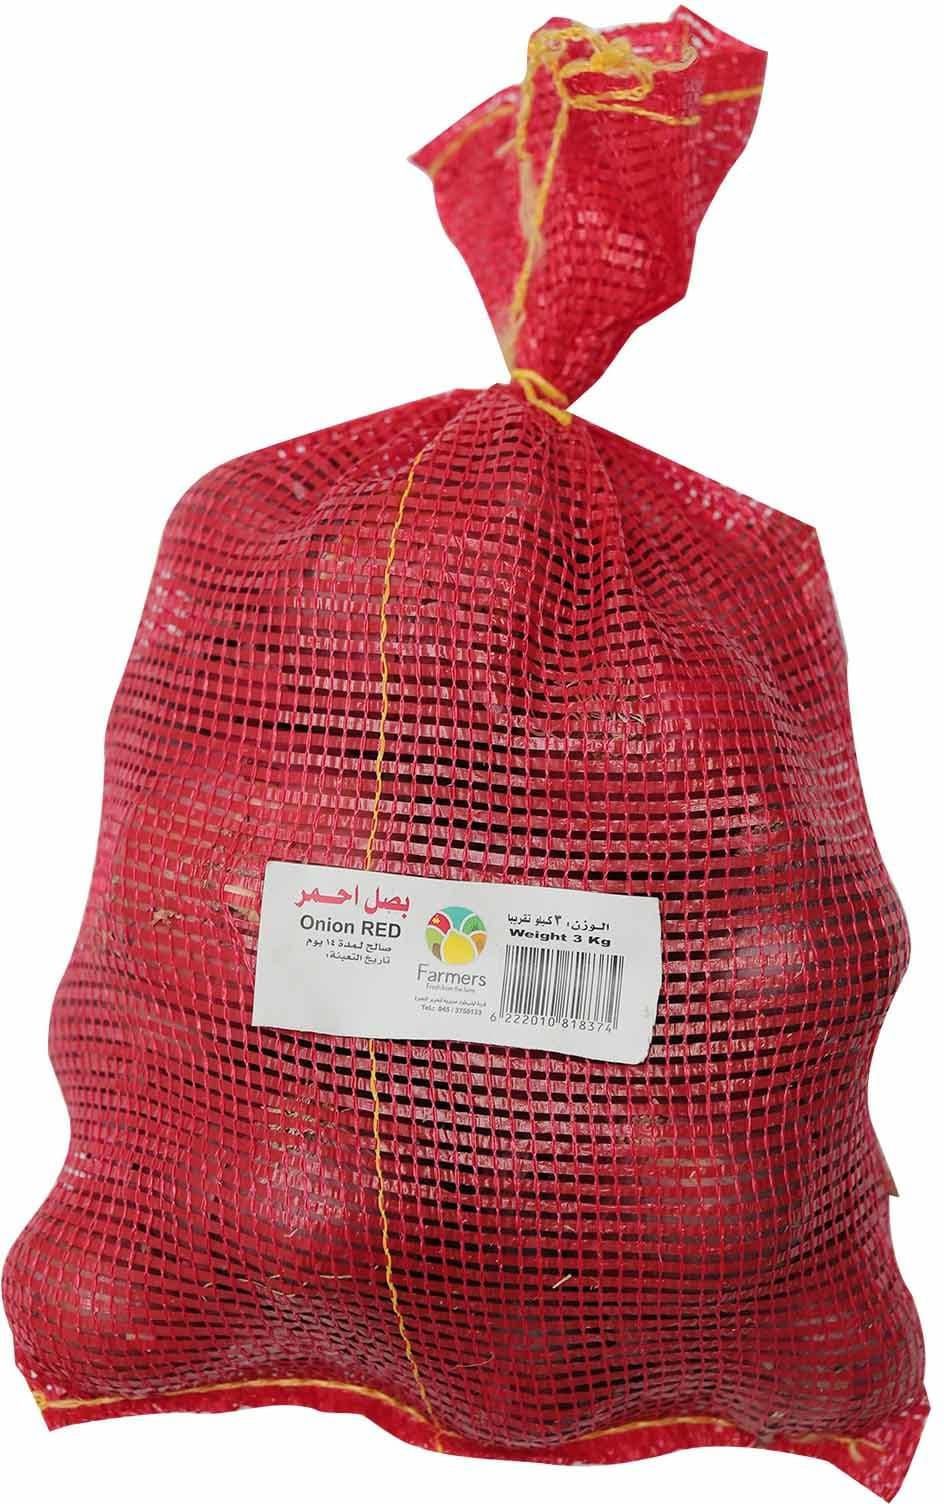 Onion Red - 3Kg